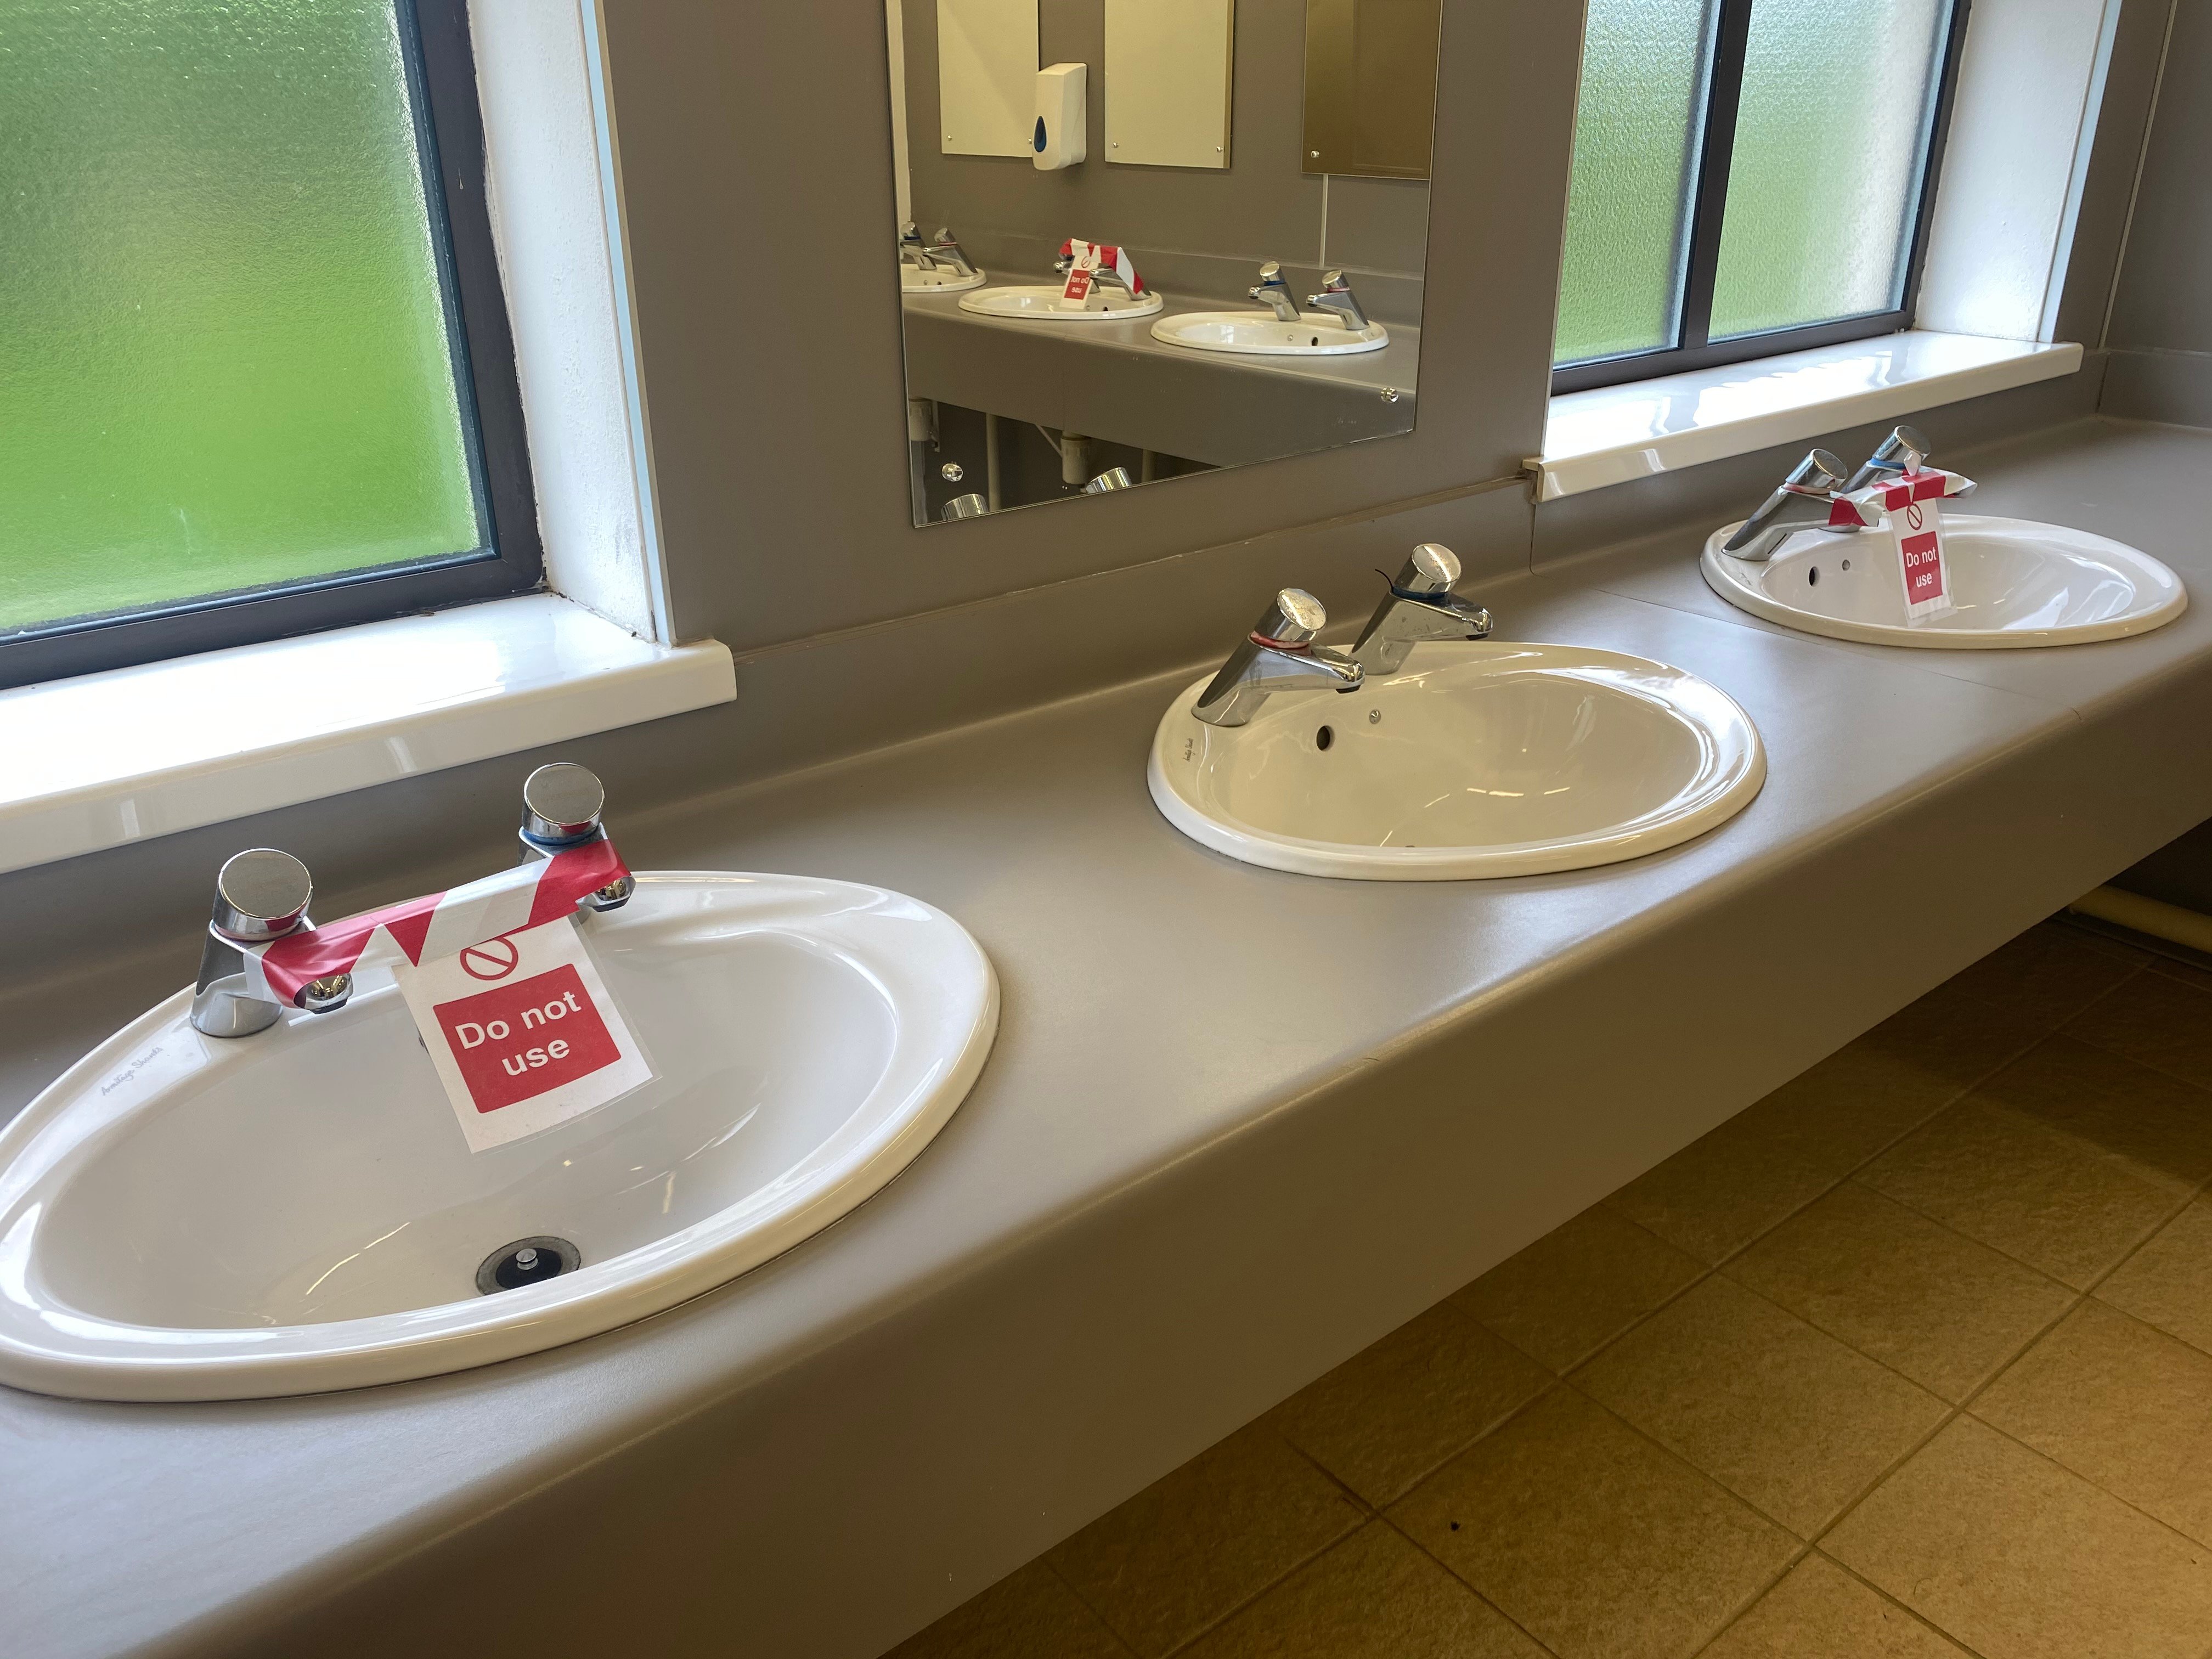 public toilet sinks  with warnings one them saying 'Do not use'